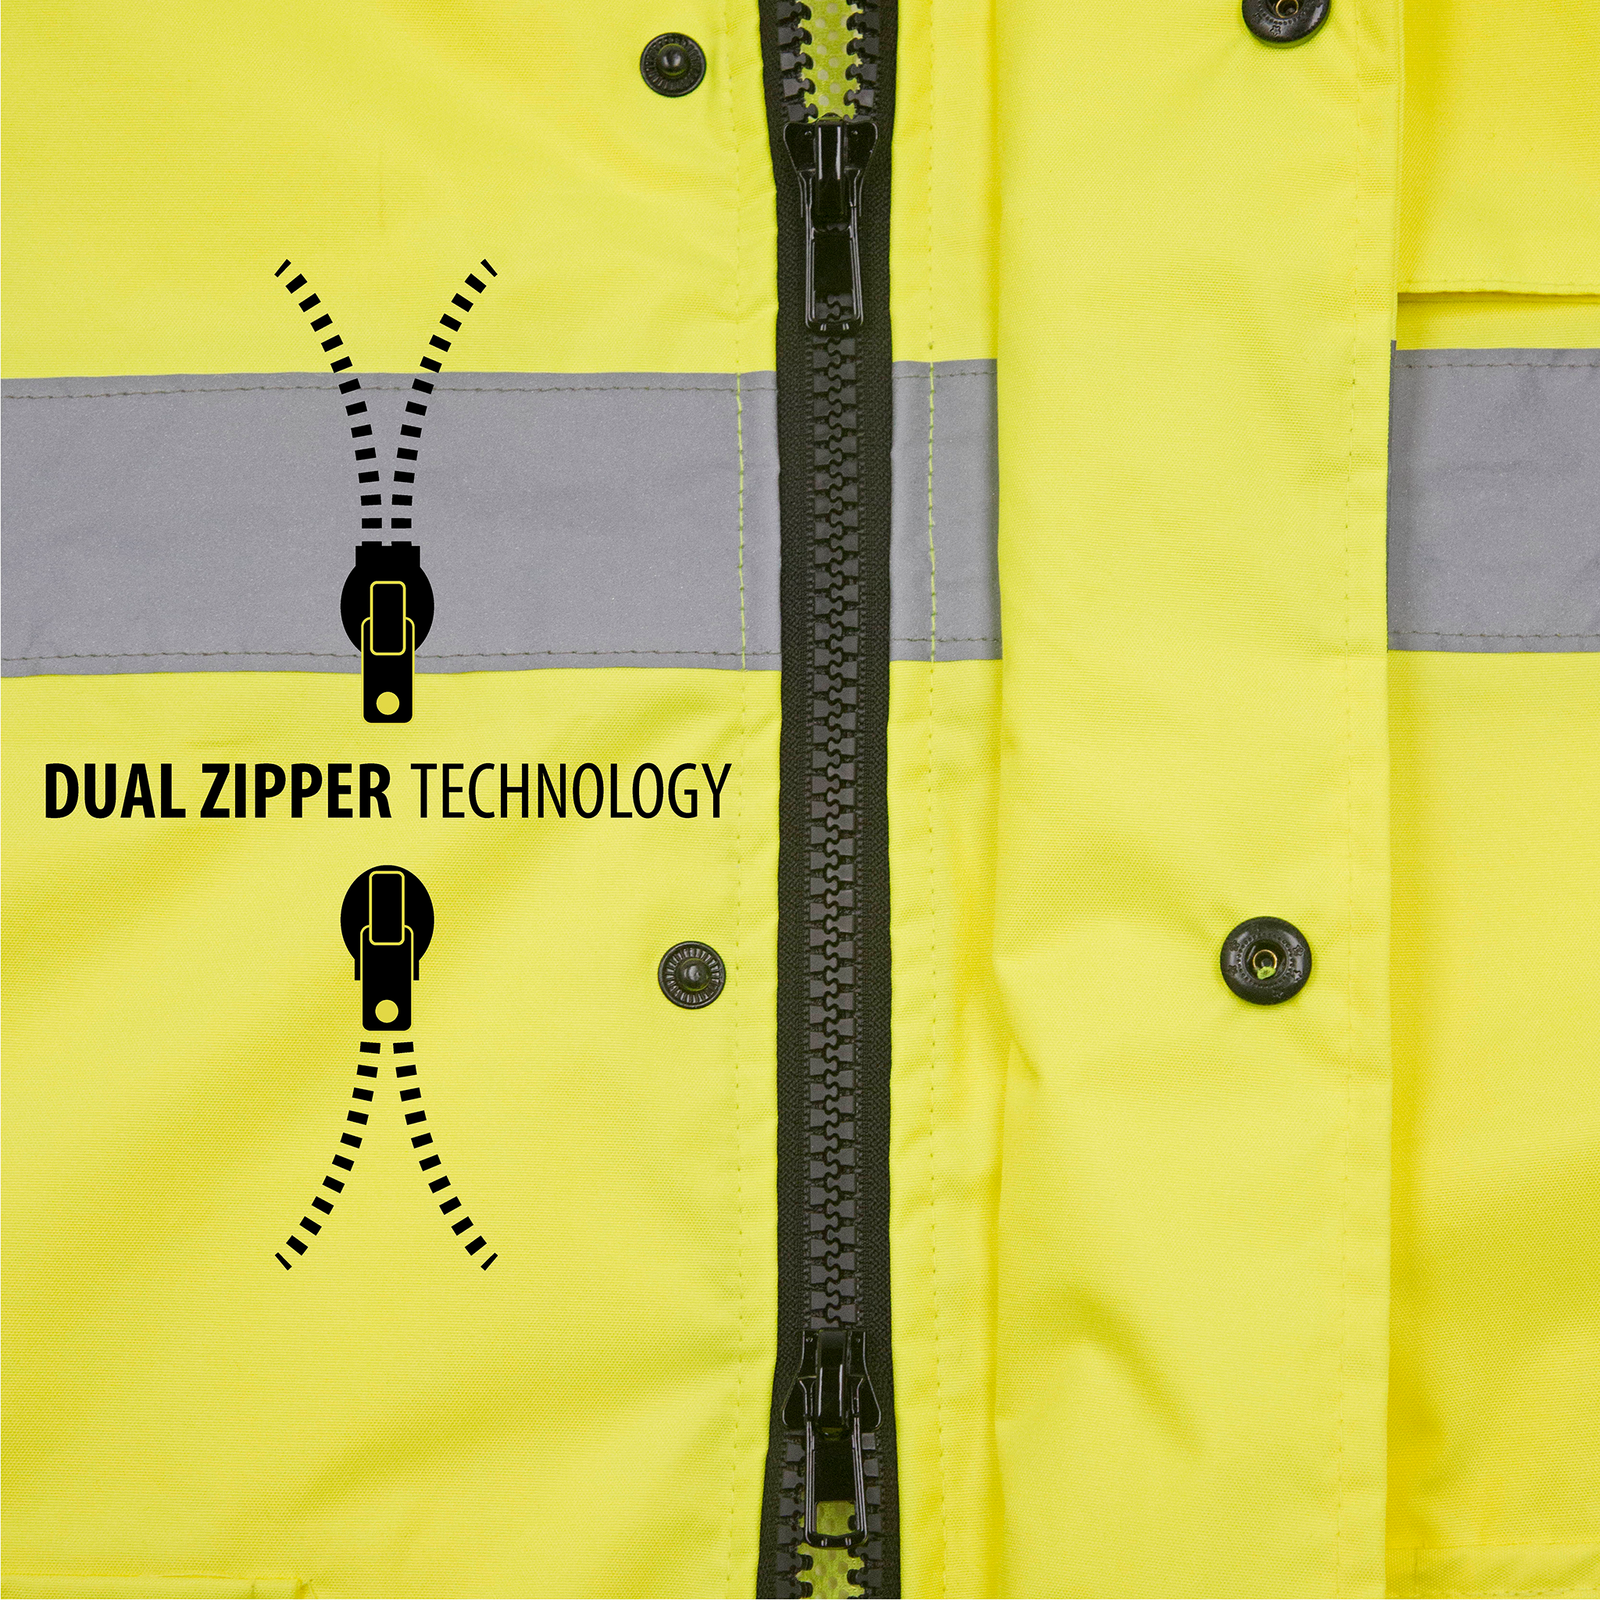 Close up image of the zipper. This zipper has dual technology because it opens from the bottom up and from the top down.